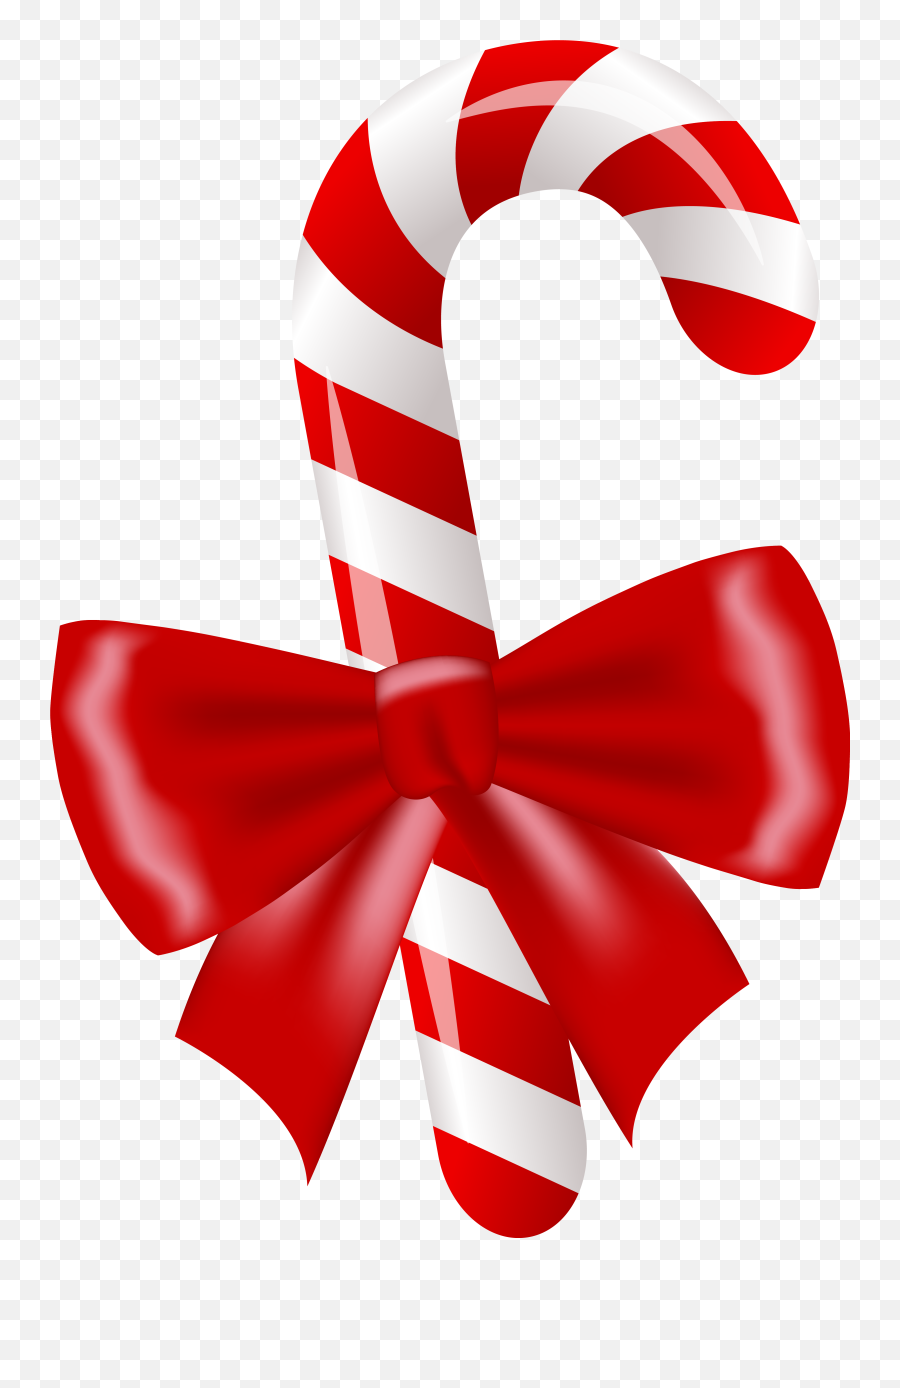 Library Of Christmas Candy Cane Black Png Transparent Background